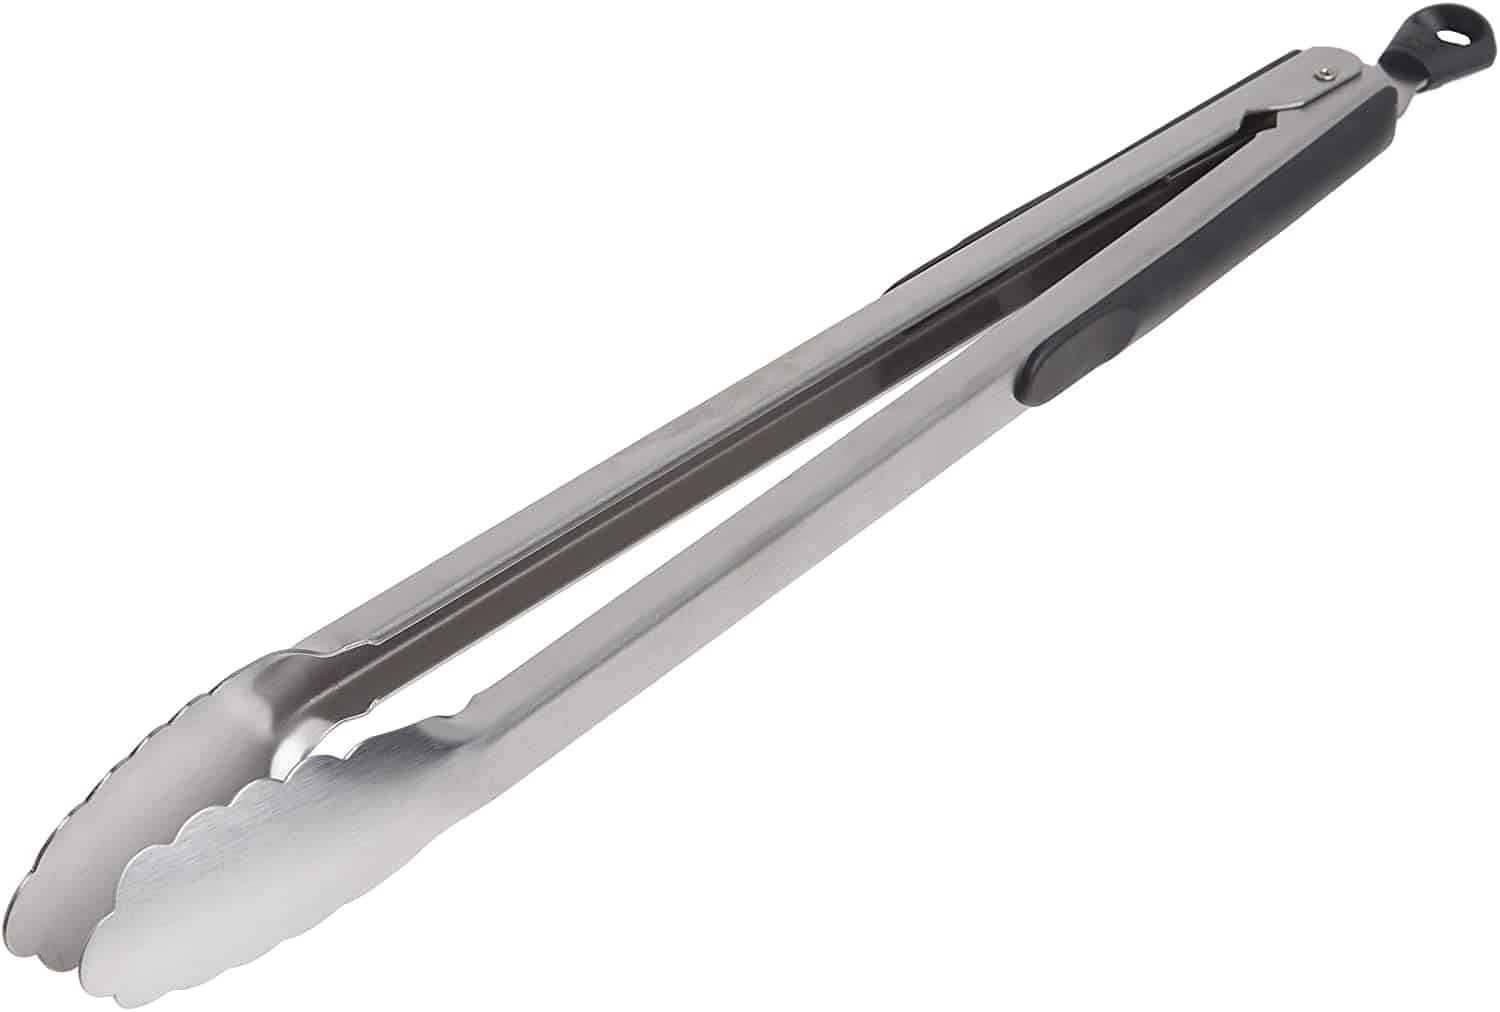 Best overall BBQ grill tongs- OXO Good Grips 16-Inch